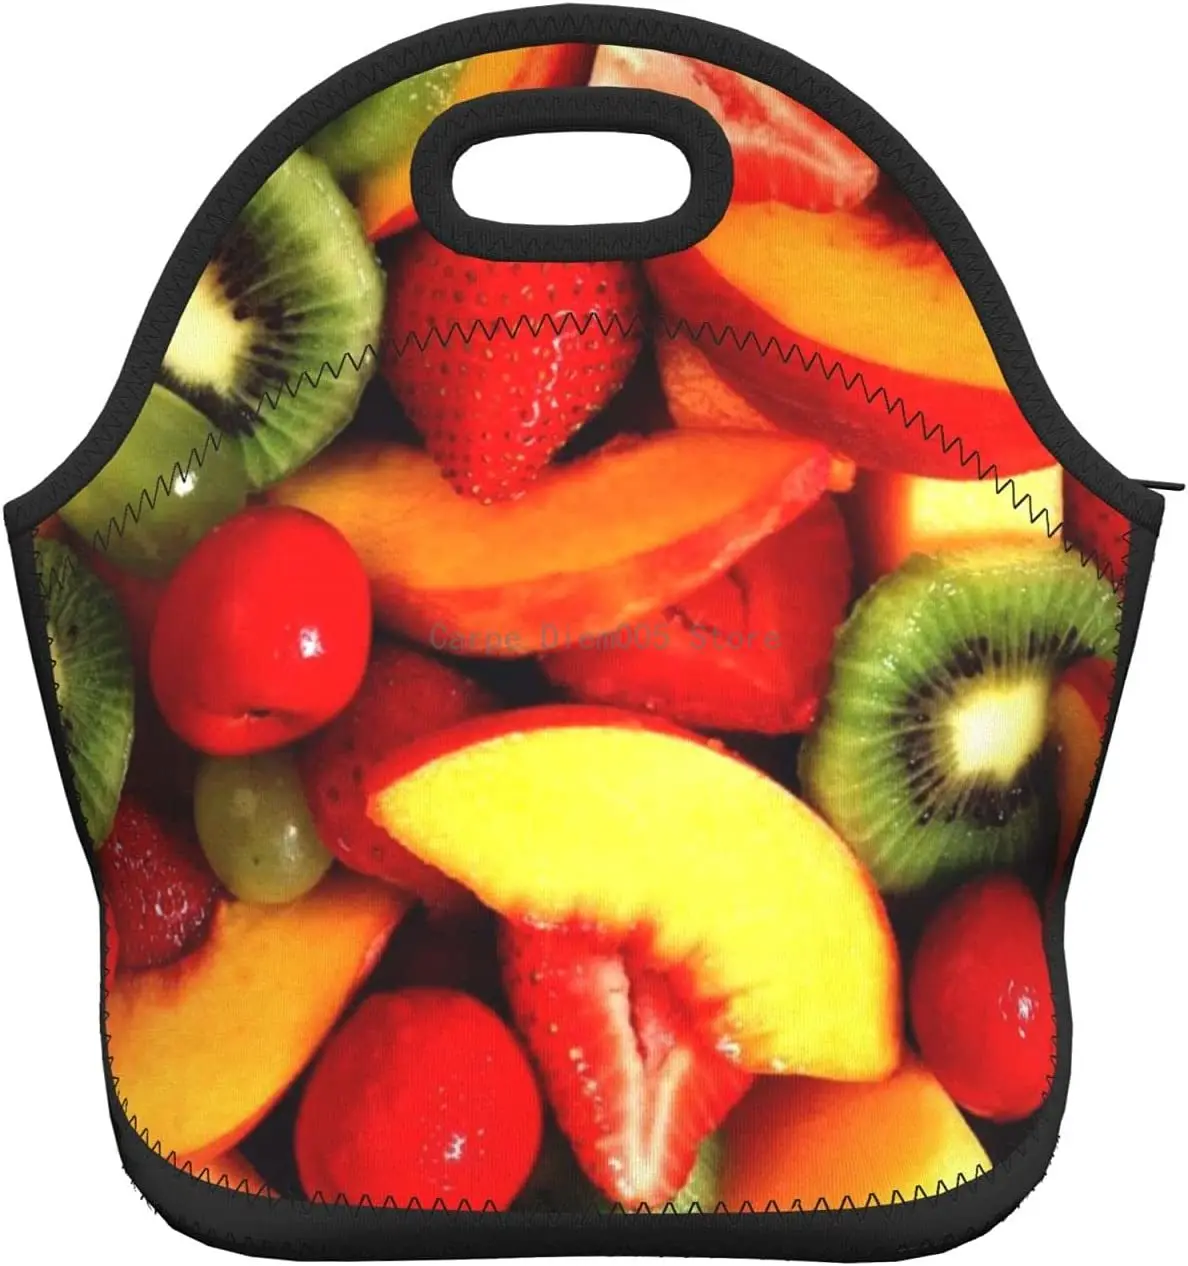 

Fresh Fruits And Vegetables Neoprene Lunch Bag/Lunch Box/Lunch Tote/Picnic Bags Insulated Cooler Travel Organizer School Work